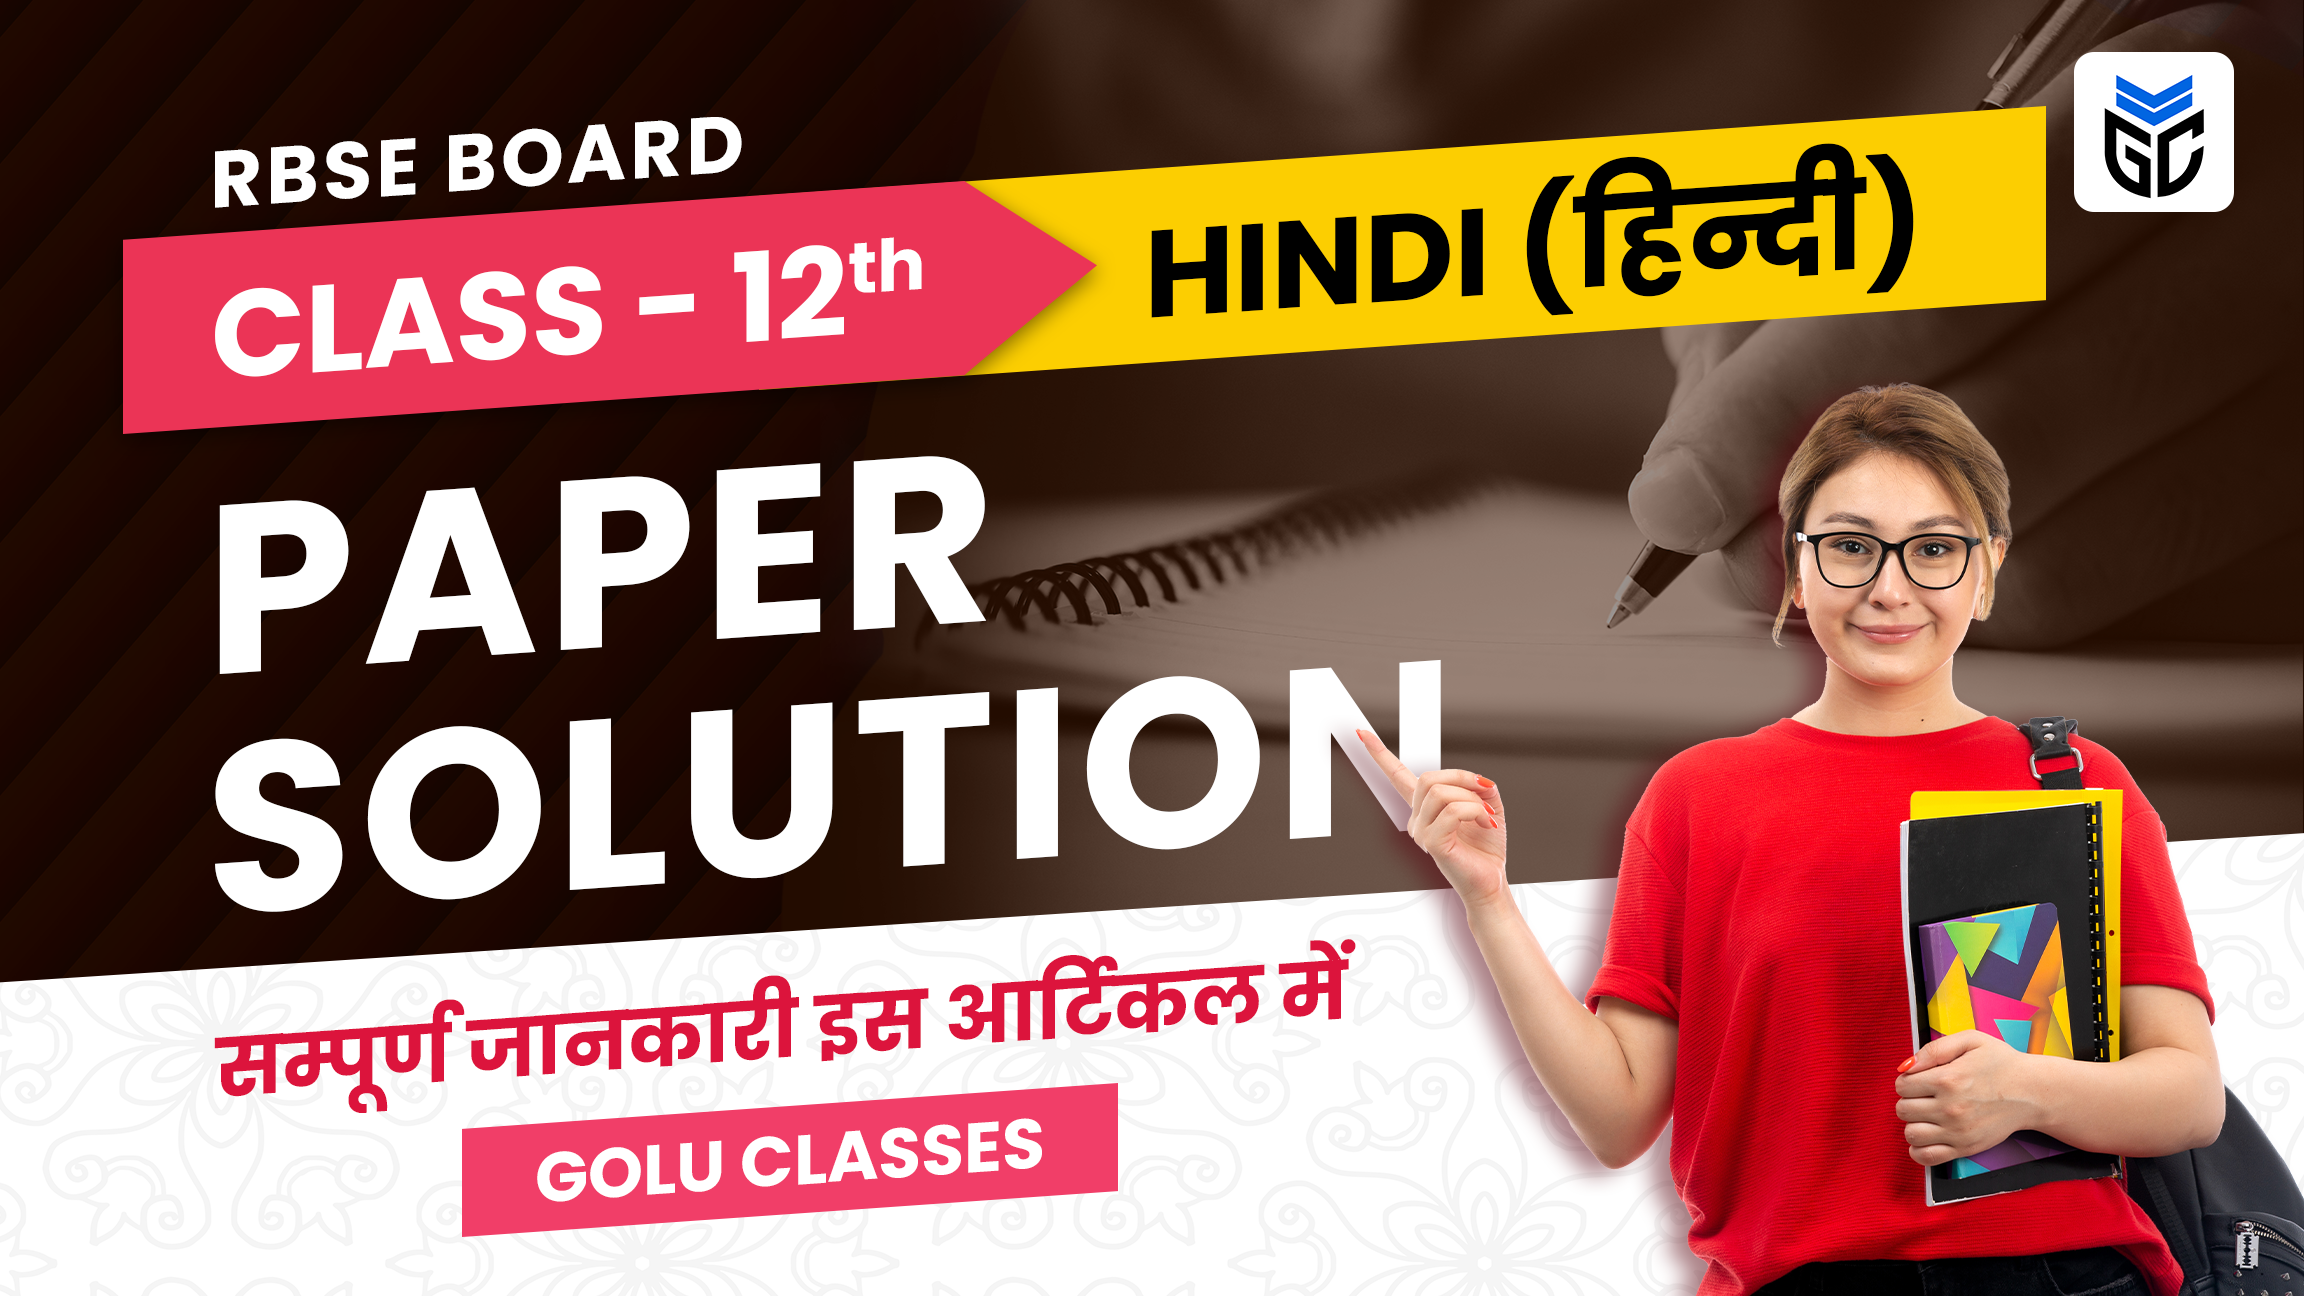 RBSE Board 12th Class Hindi Paper Solution | Class 12th Paper Solution - Hindi By Golu Classes